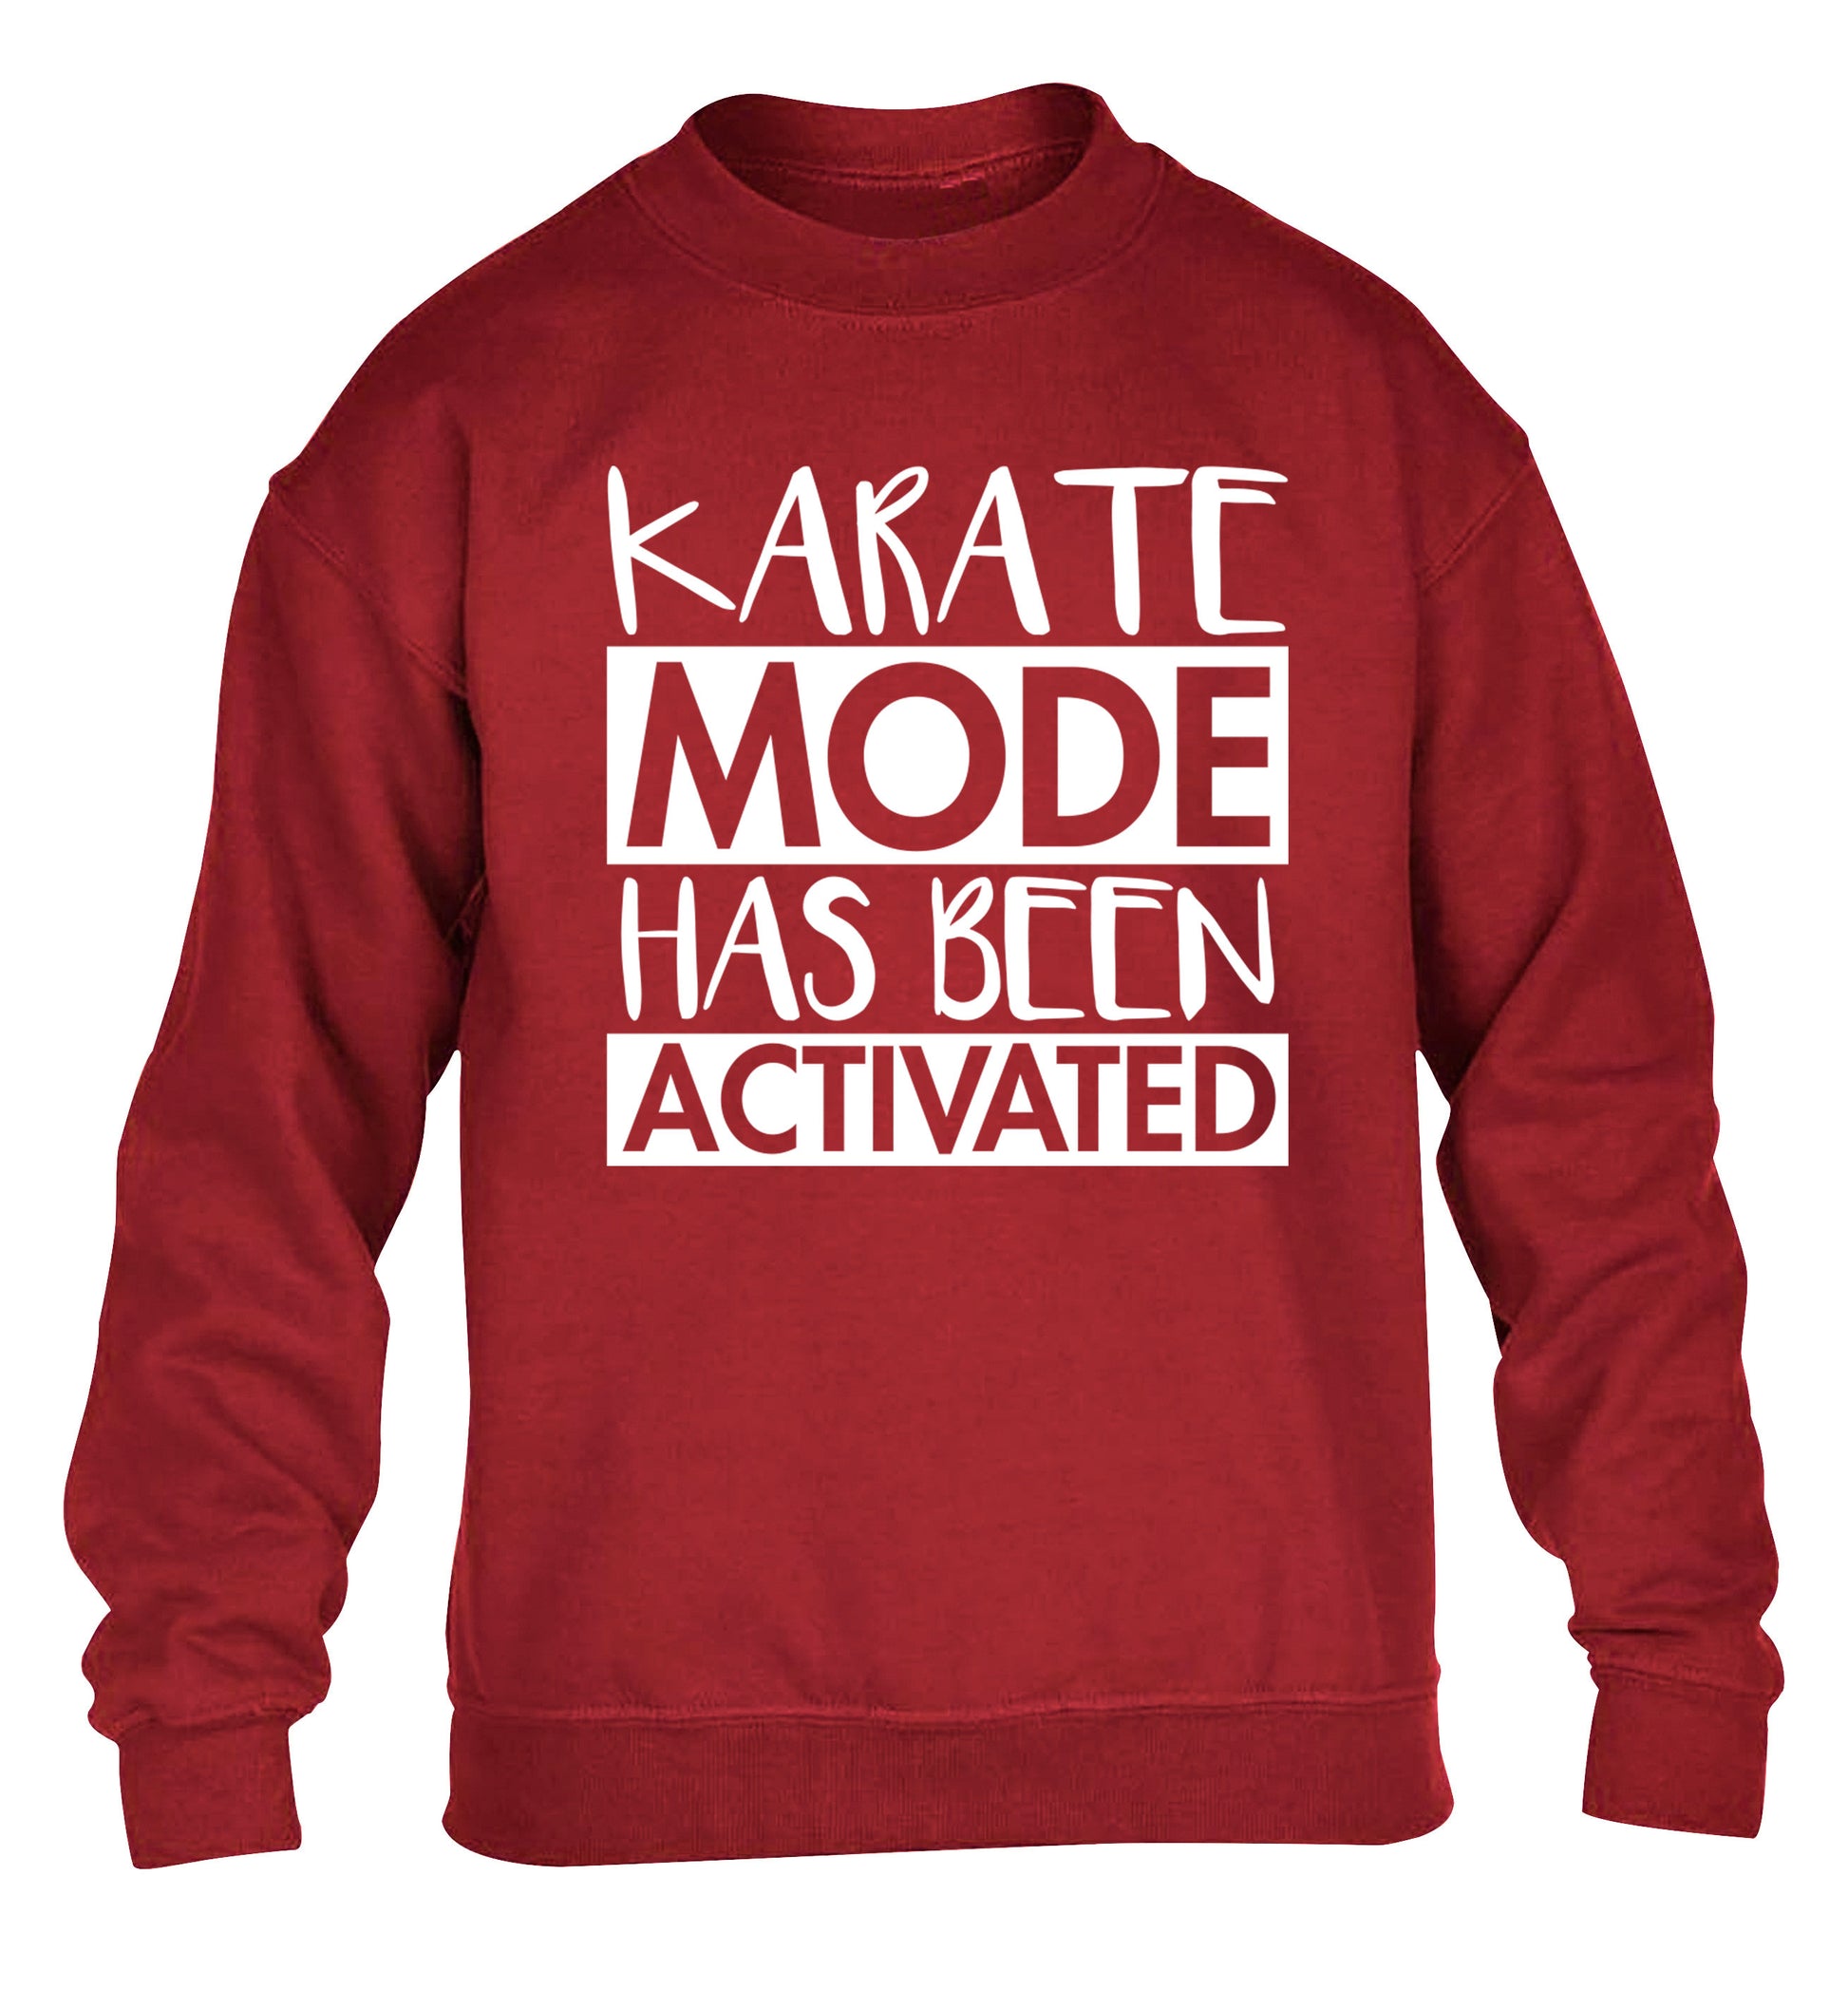 Karate mode activated children's grey sweater 12-14 Years